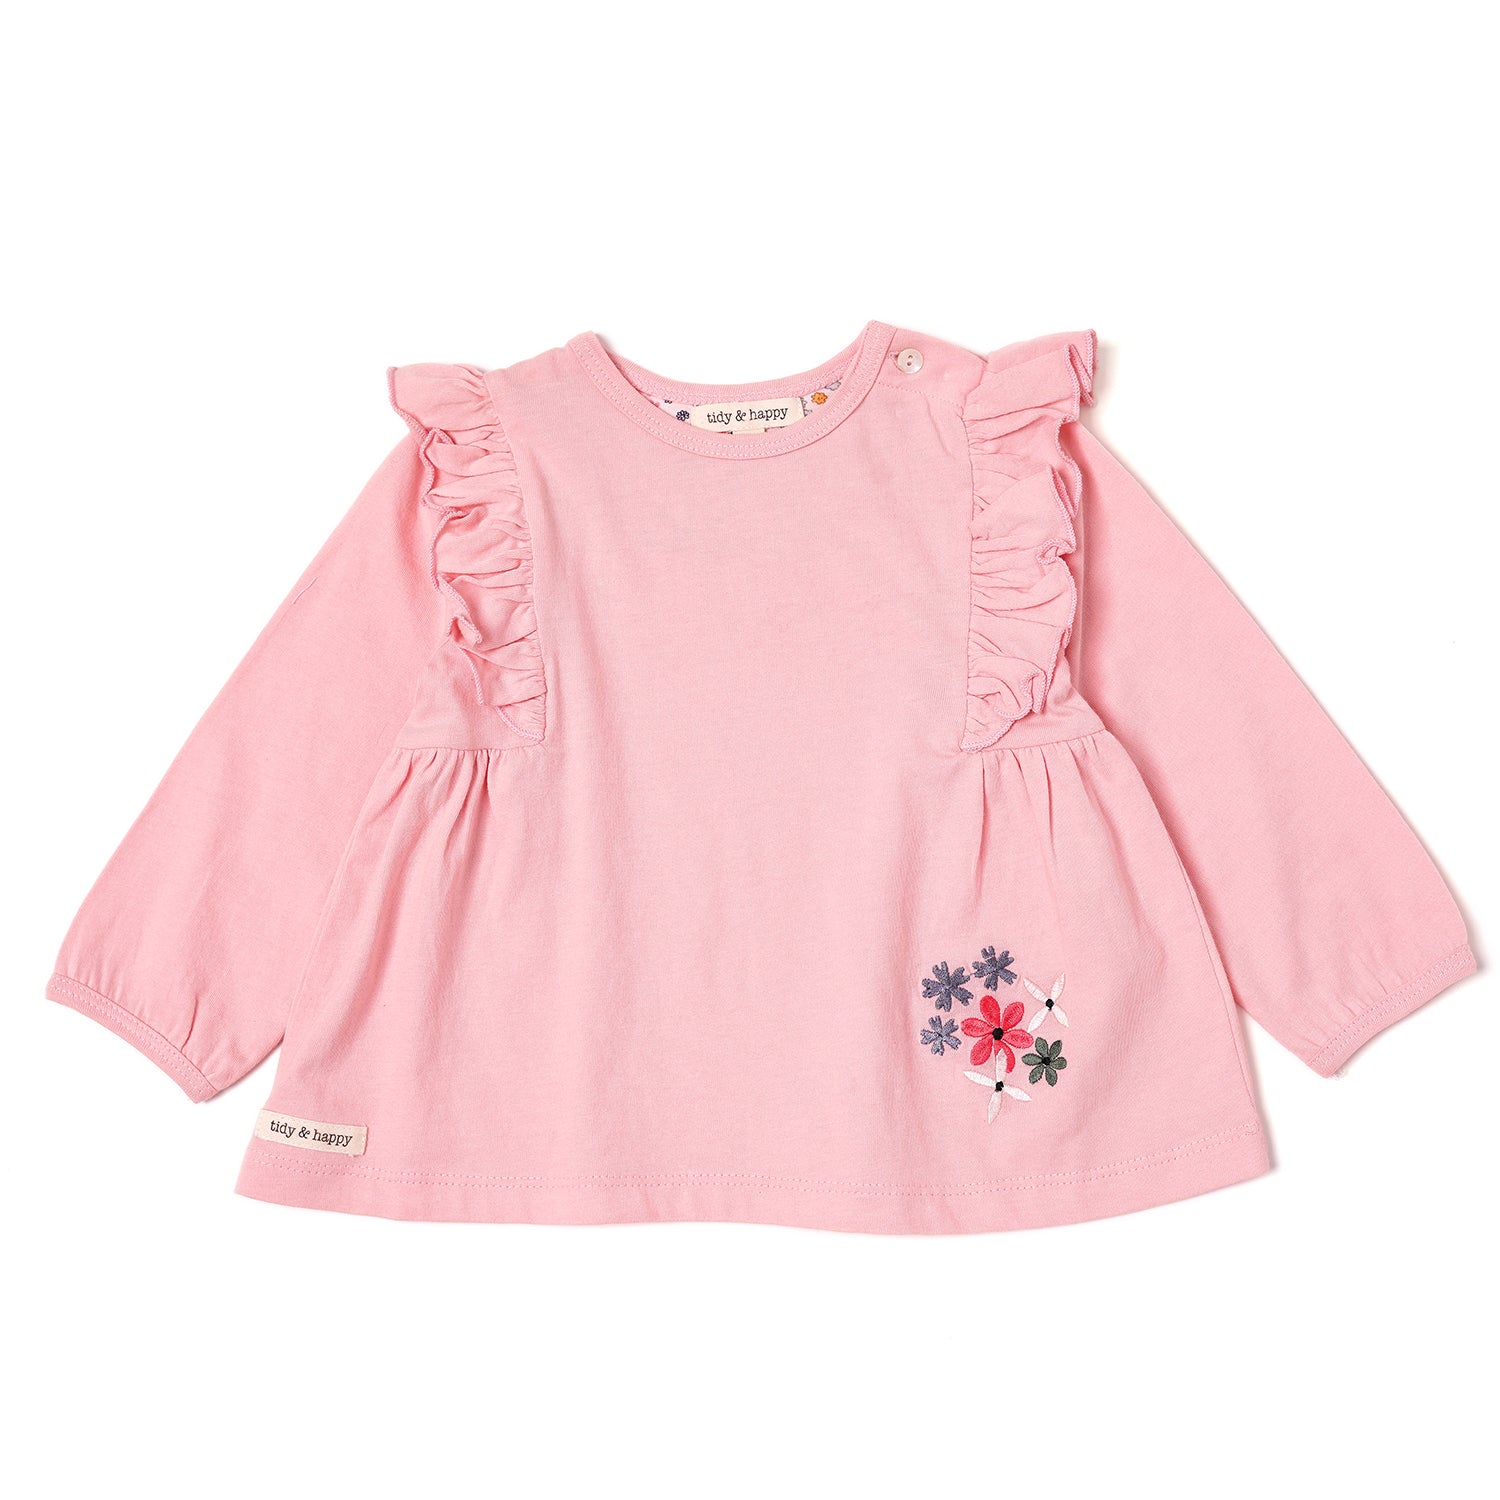 Stylish Comfy Pink Full Sleeve Frill Top for baby Girls